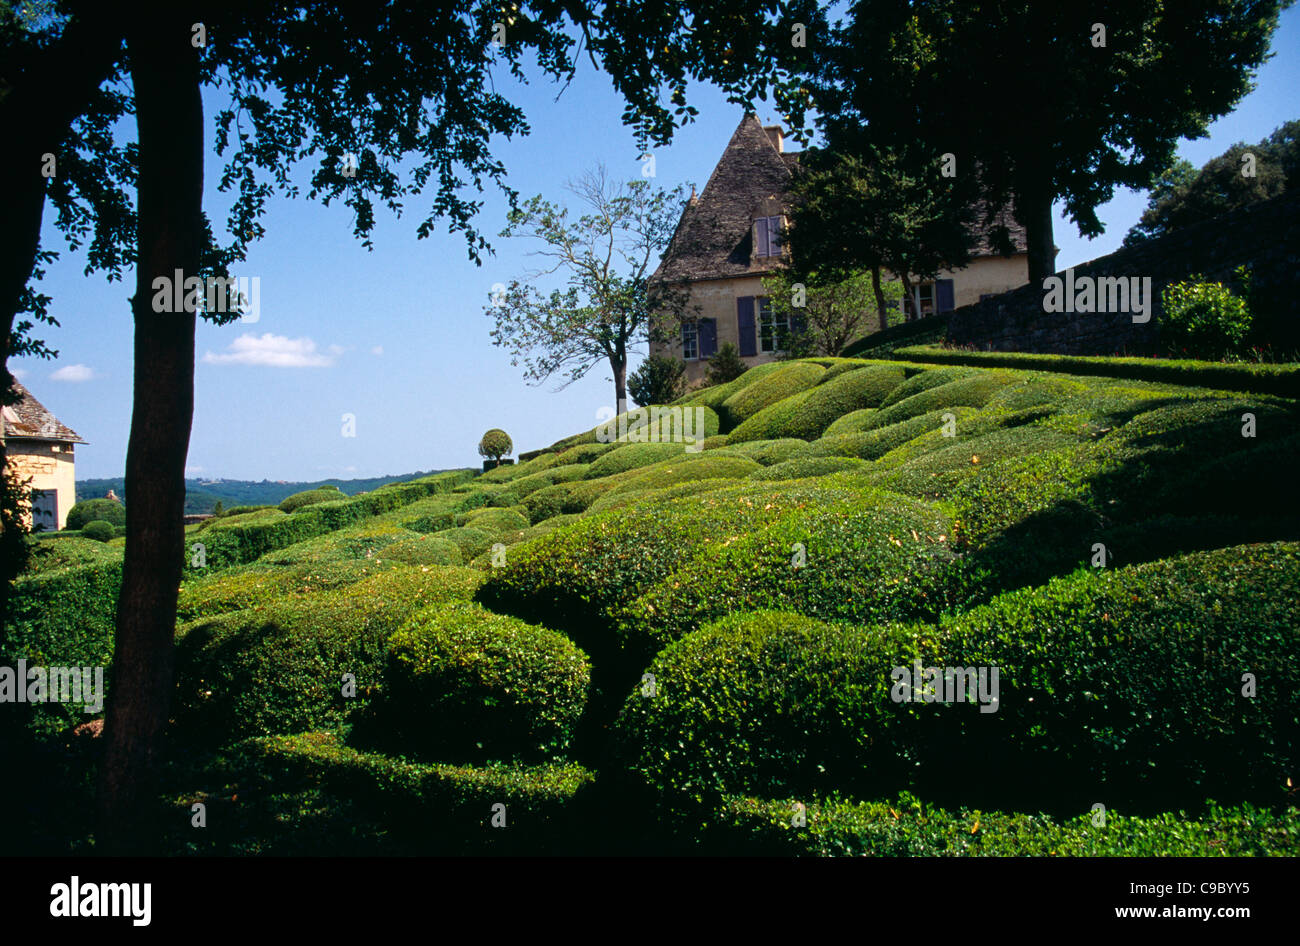 France, Aquitaine, Dordogne, Chateau de Marqueyssac near Vezac. Exterior and gardens with clipped boxwood hedges and topiary. Stock Photo